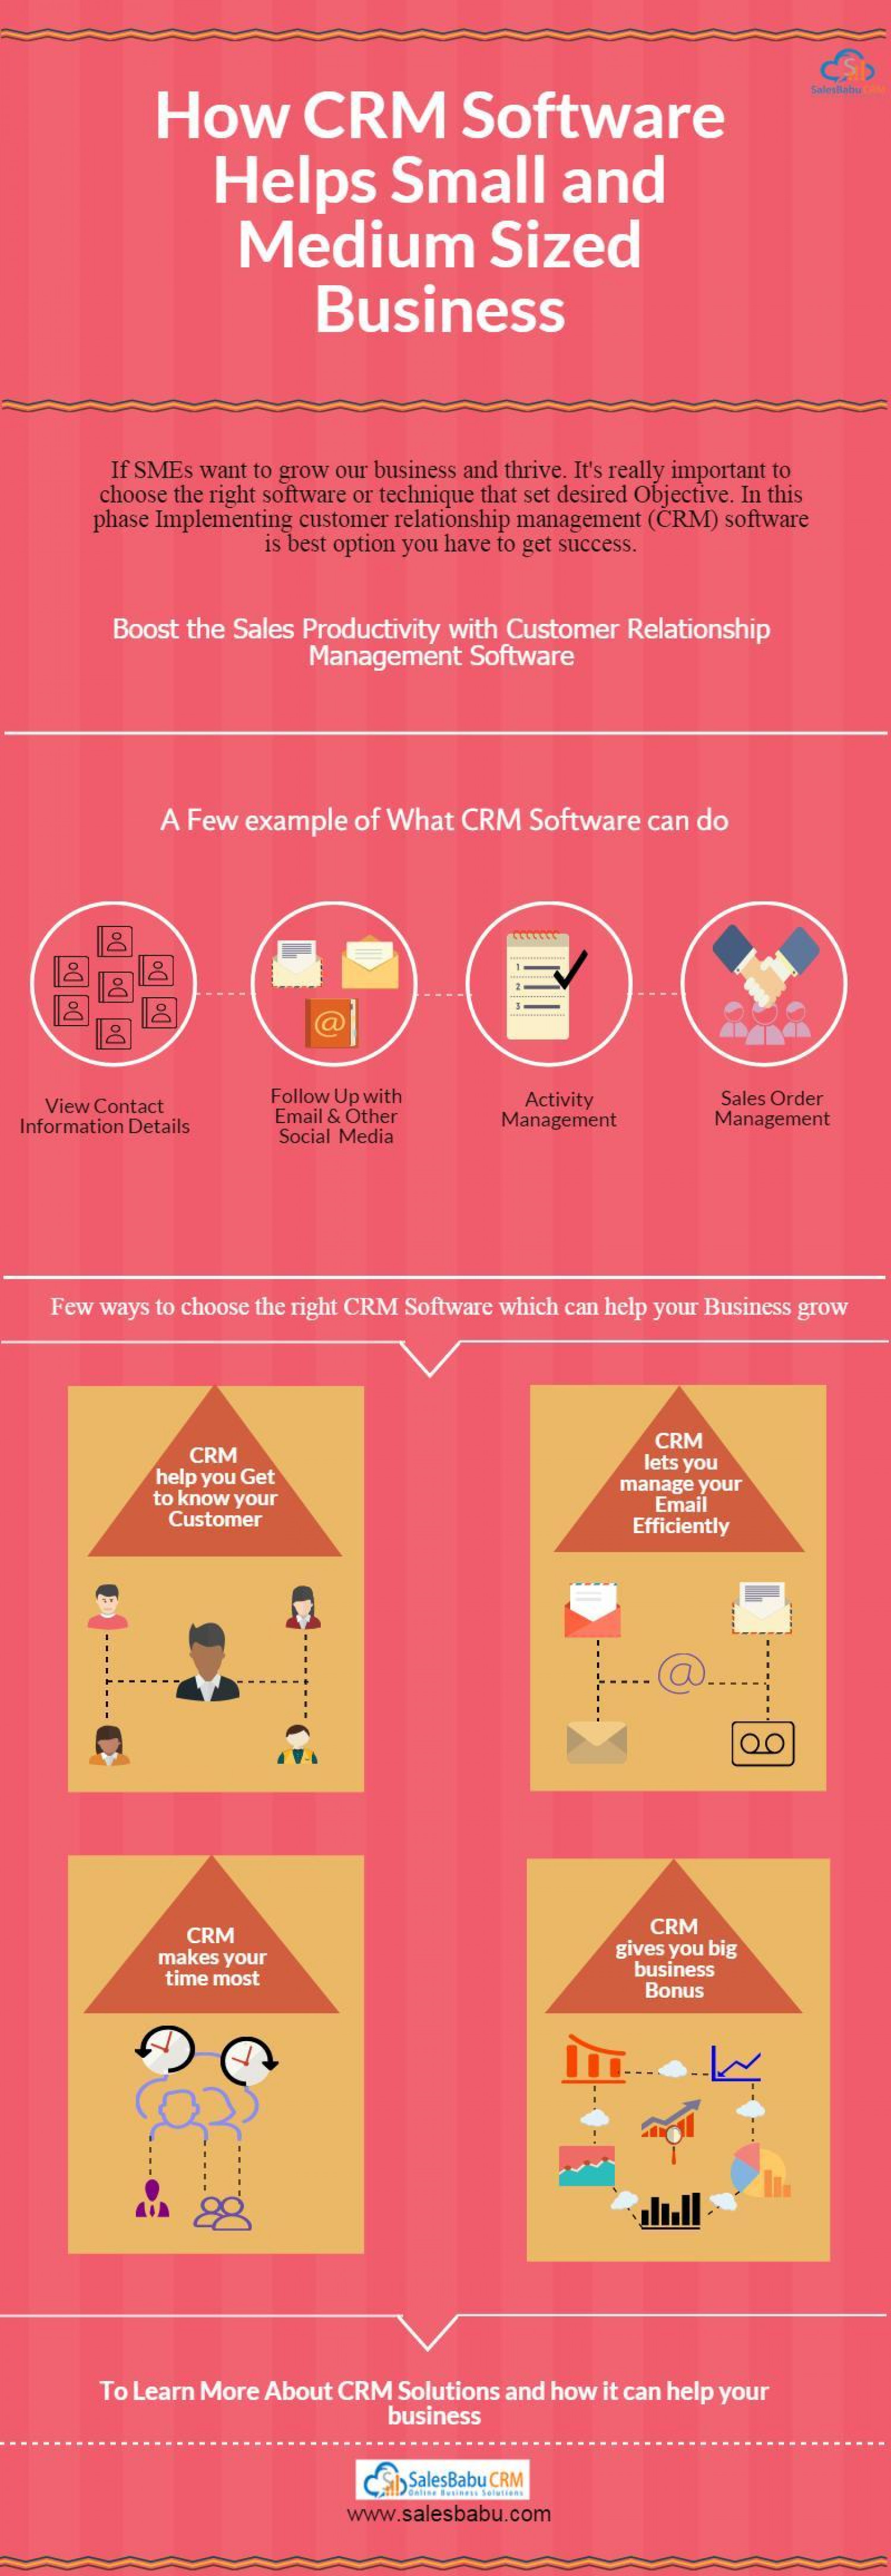 How CRM Software Helps Small and Medium Sized Business Infographic